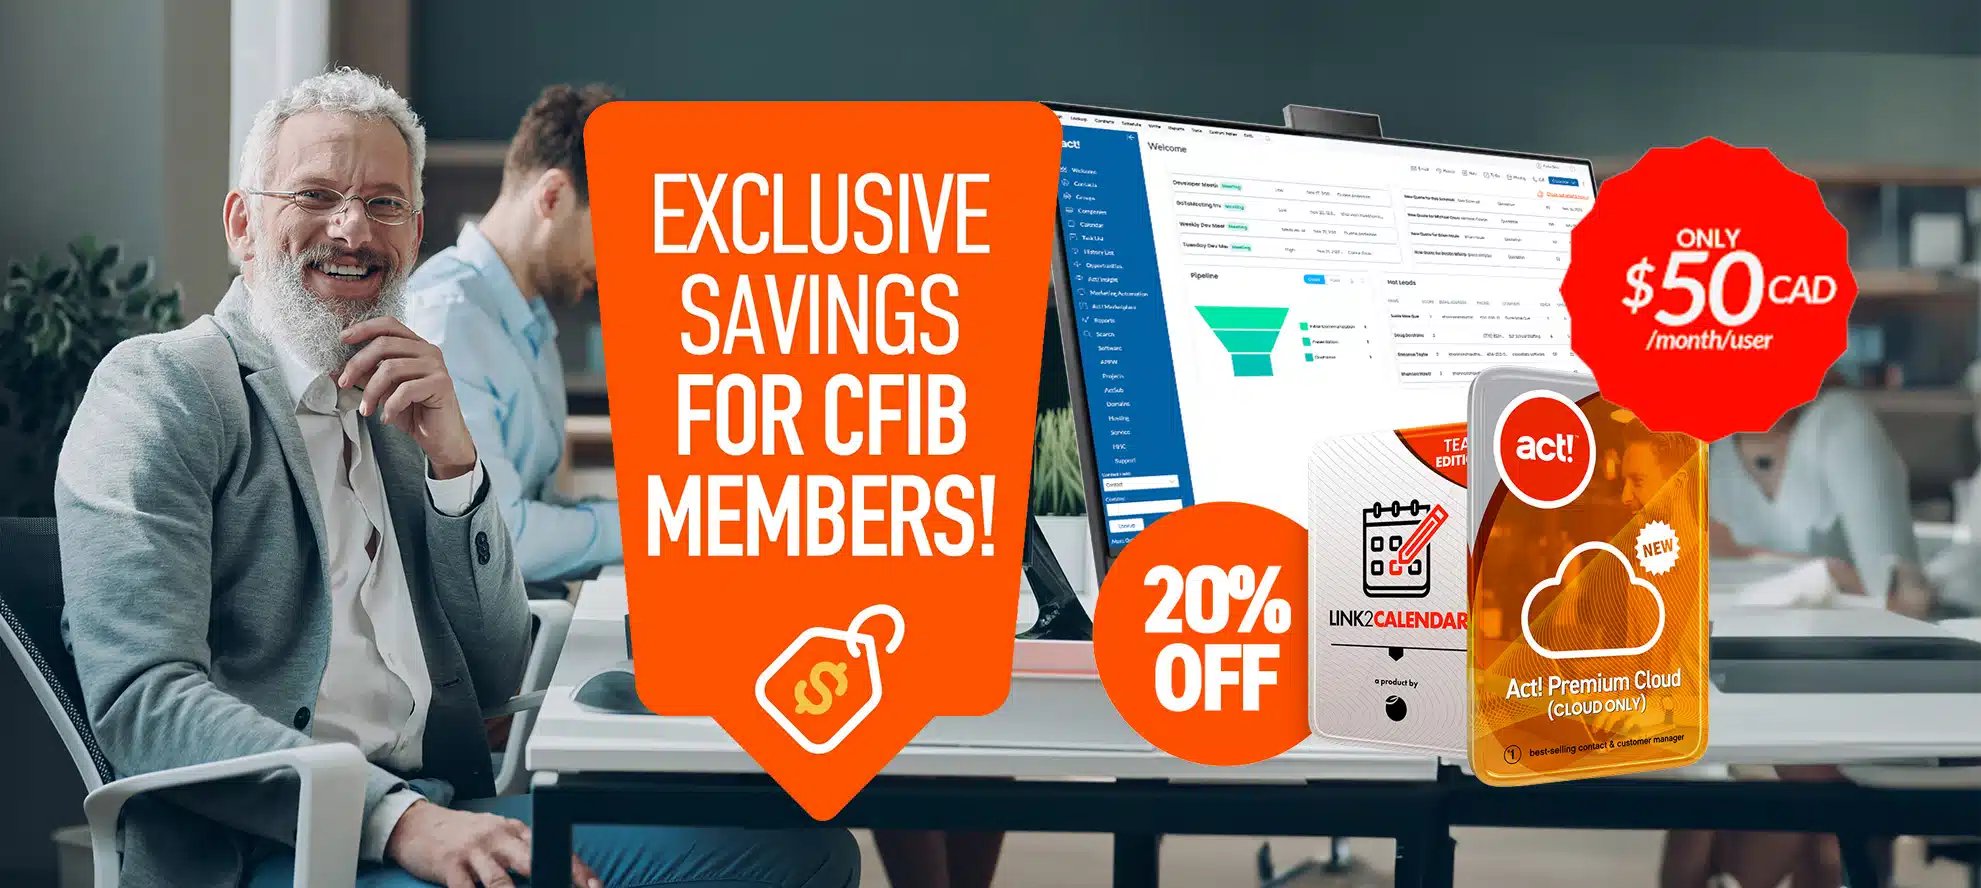 Image of a happy small business owner with the words 'Exclusive savings for CFIB members', '20% off', 'Only $50 CAD /month/user', and 'Link2calendar' written on the image